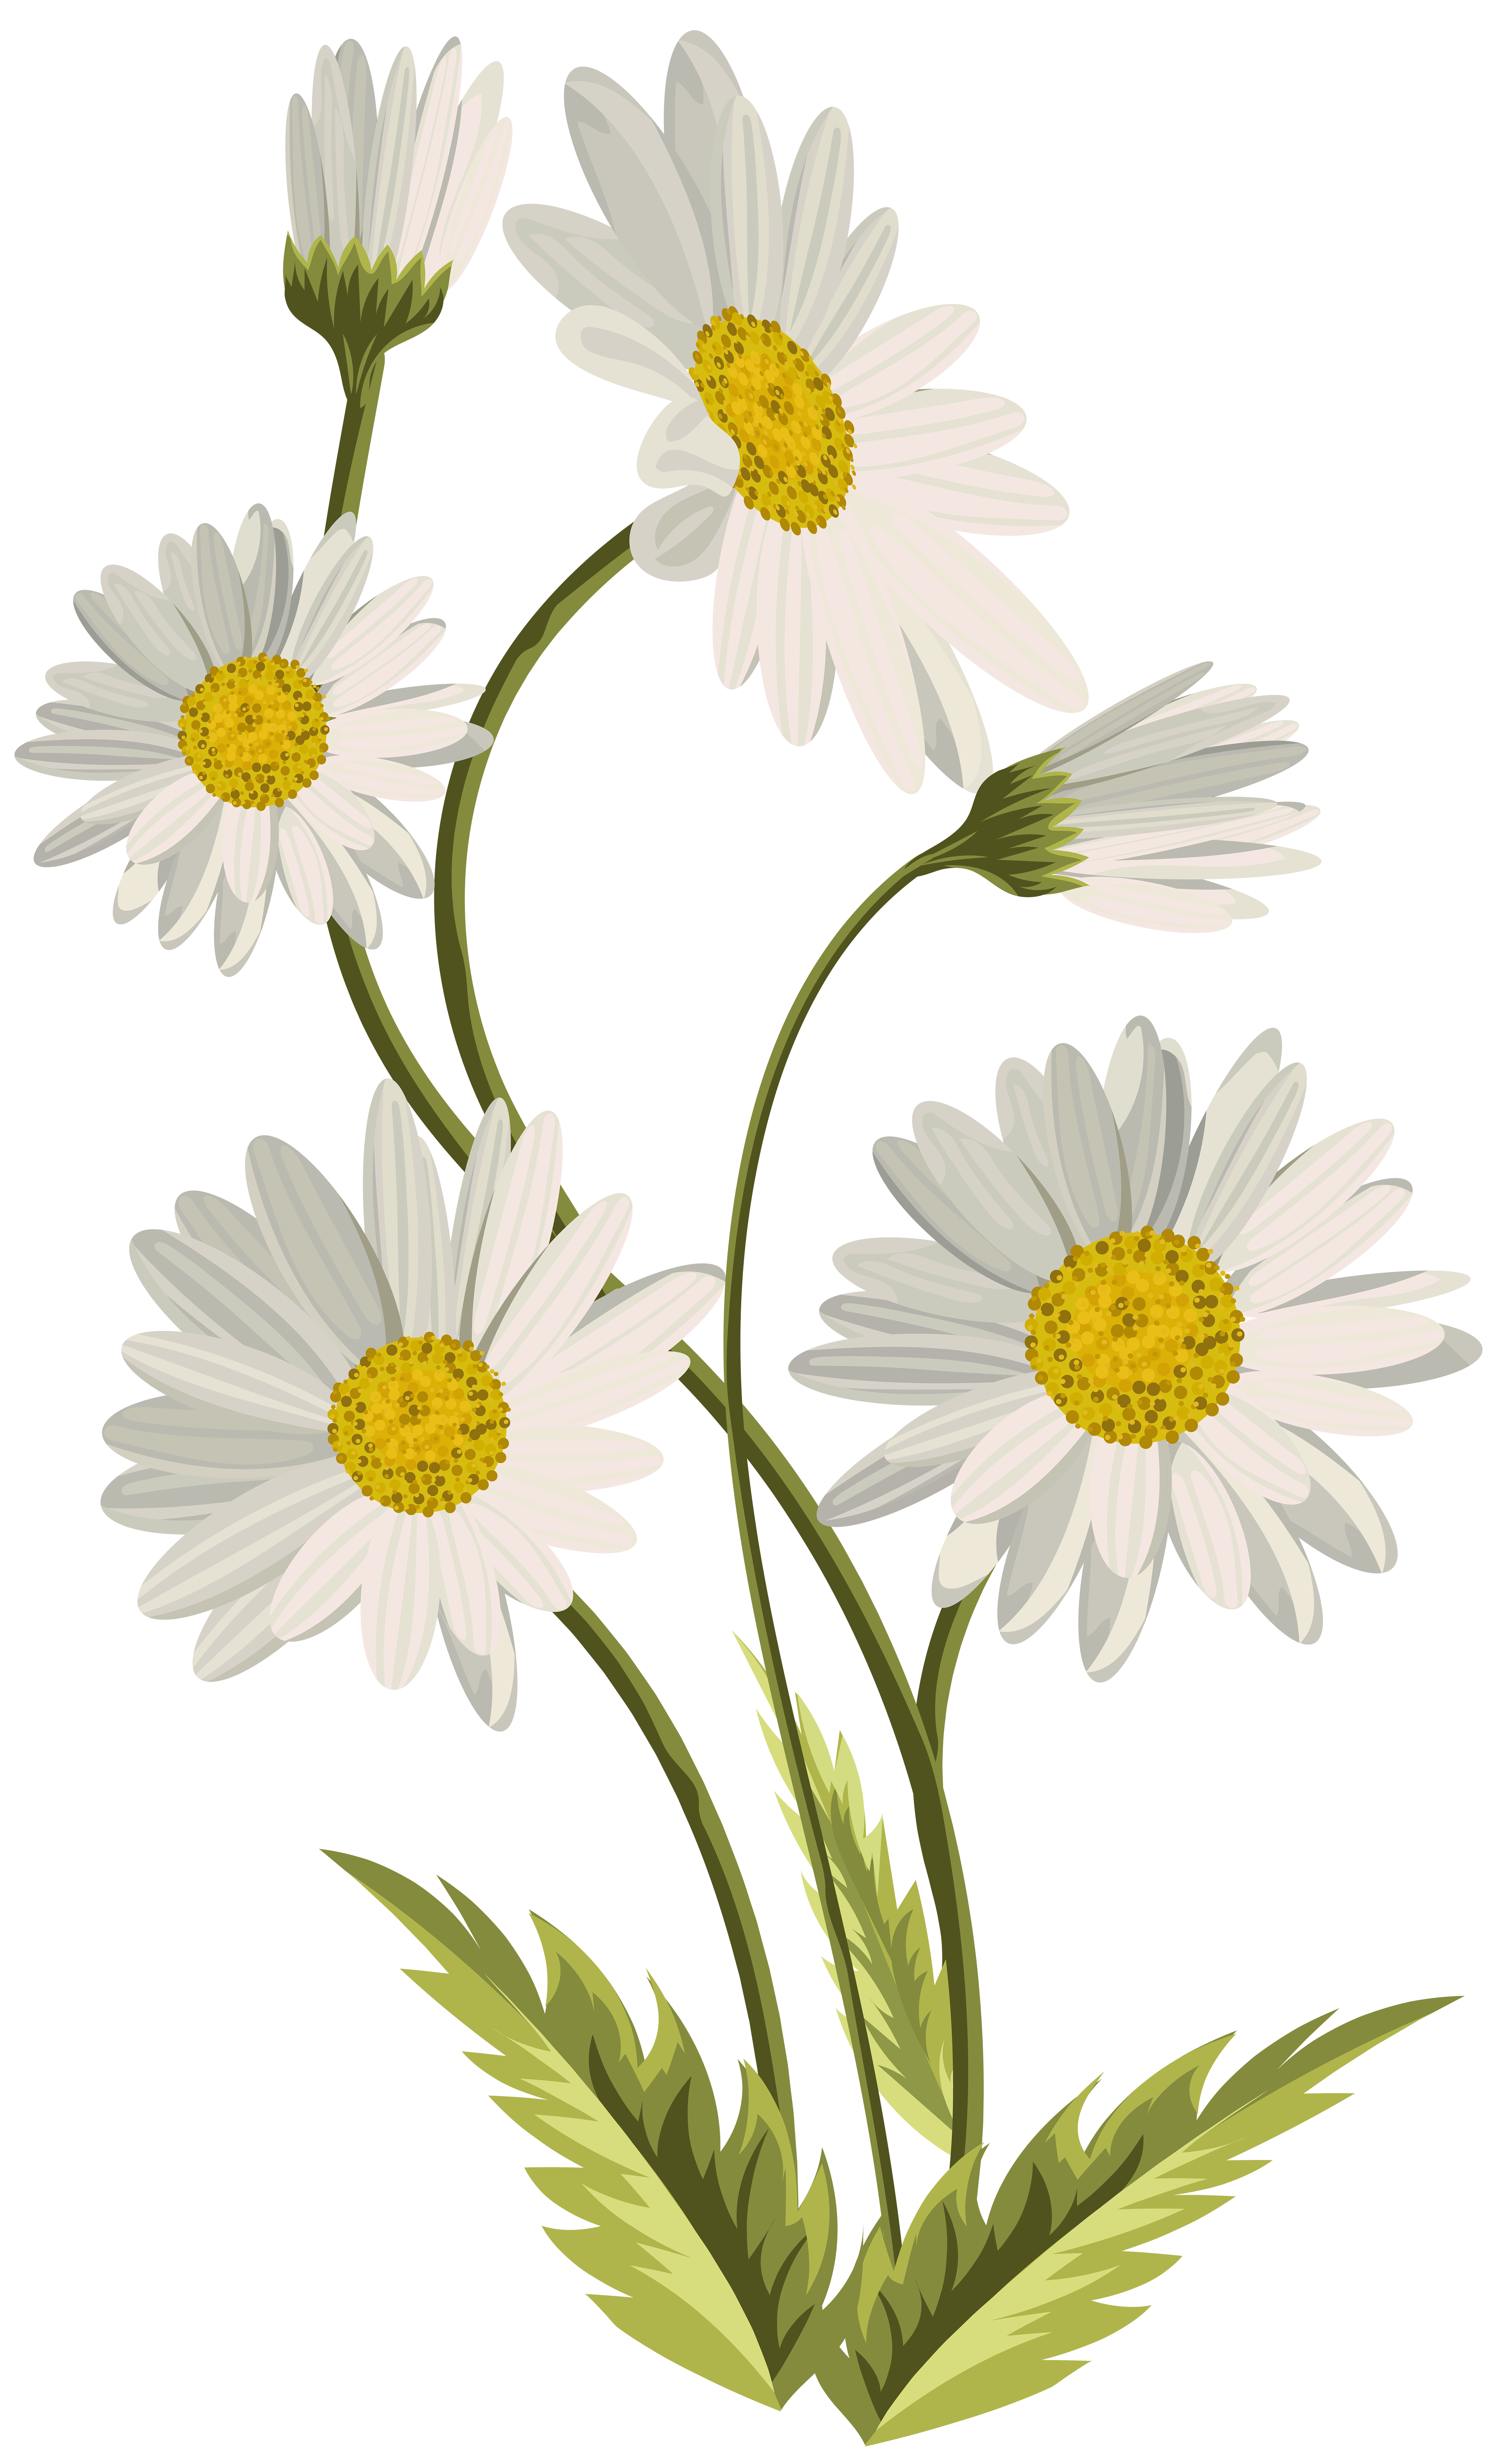 daisy clipart different flower